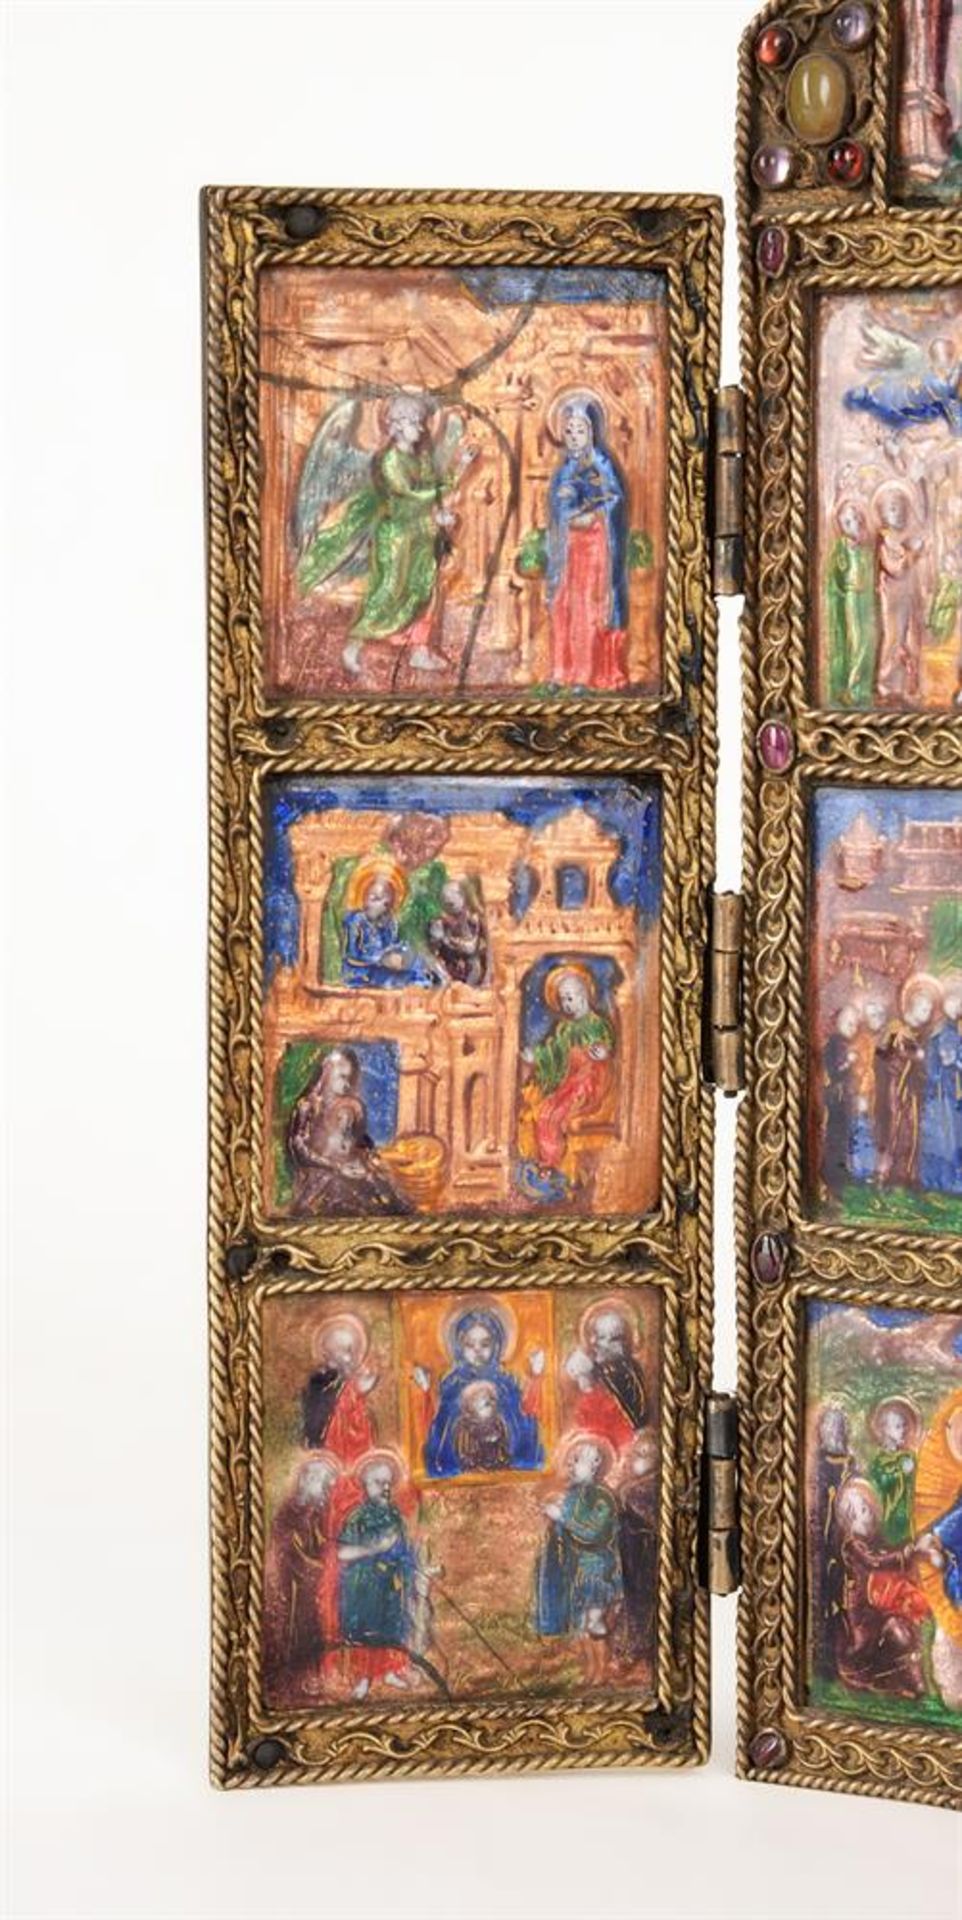 AN ENAMEL SET FOLDING DEVOTIONAL TRIPTYCH IN THE EARLY 16TH CENTURY LIMOGES MANNER - Image 3 of 6